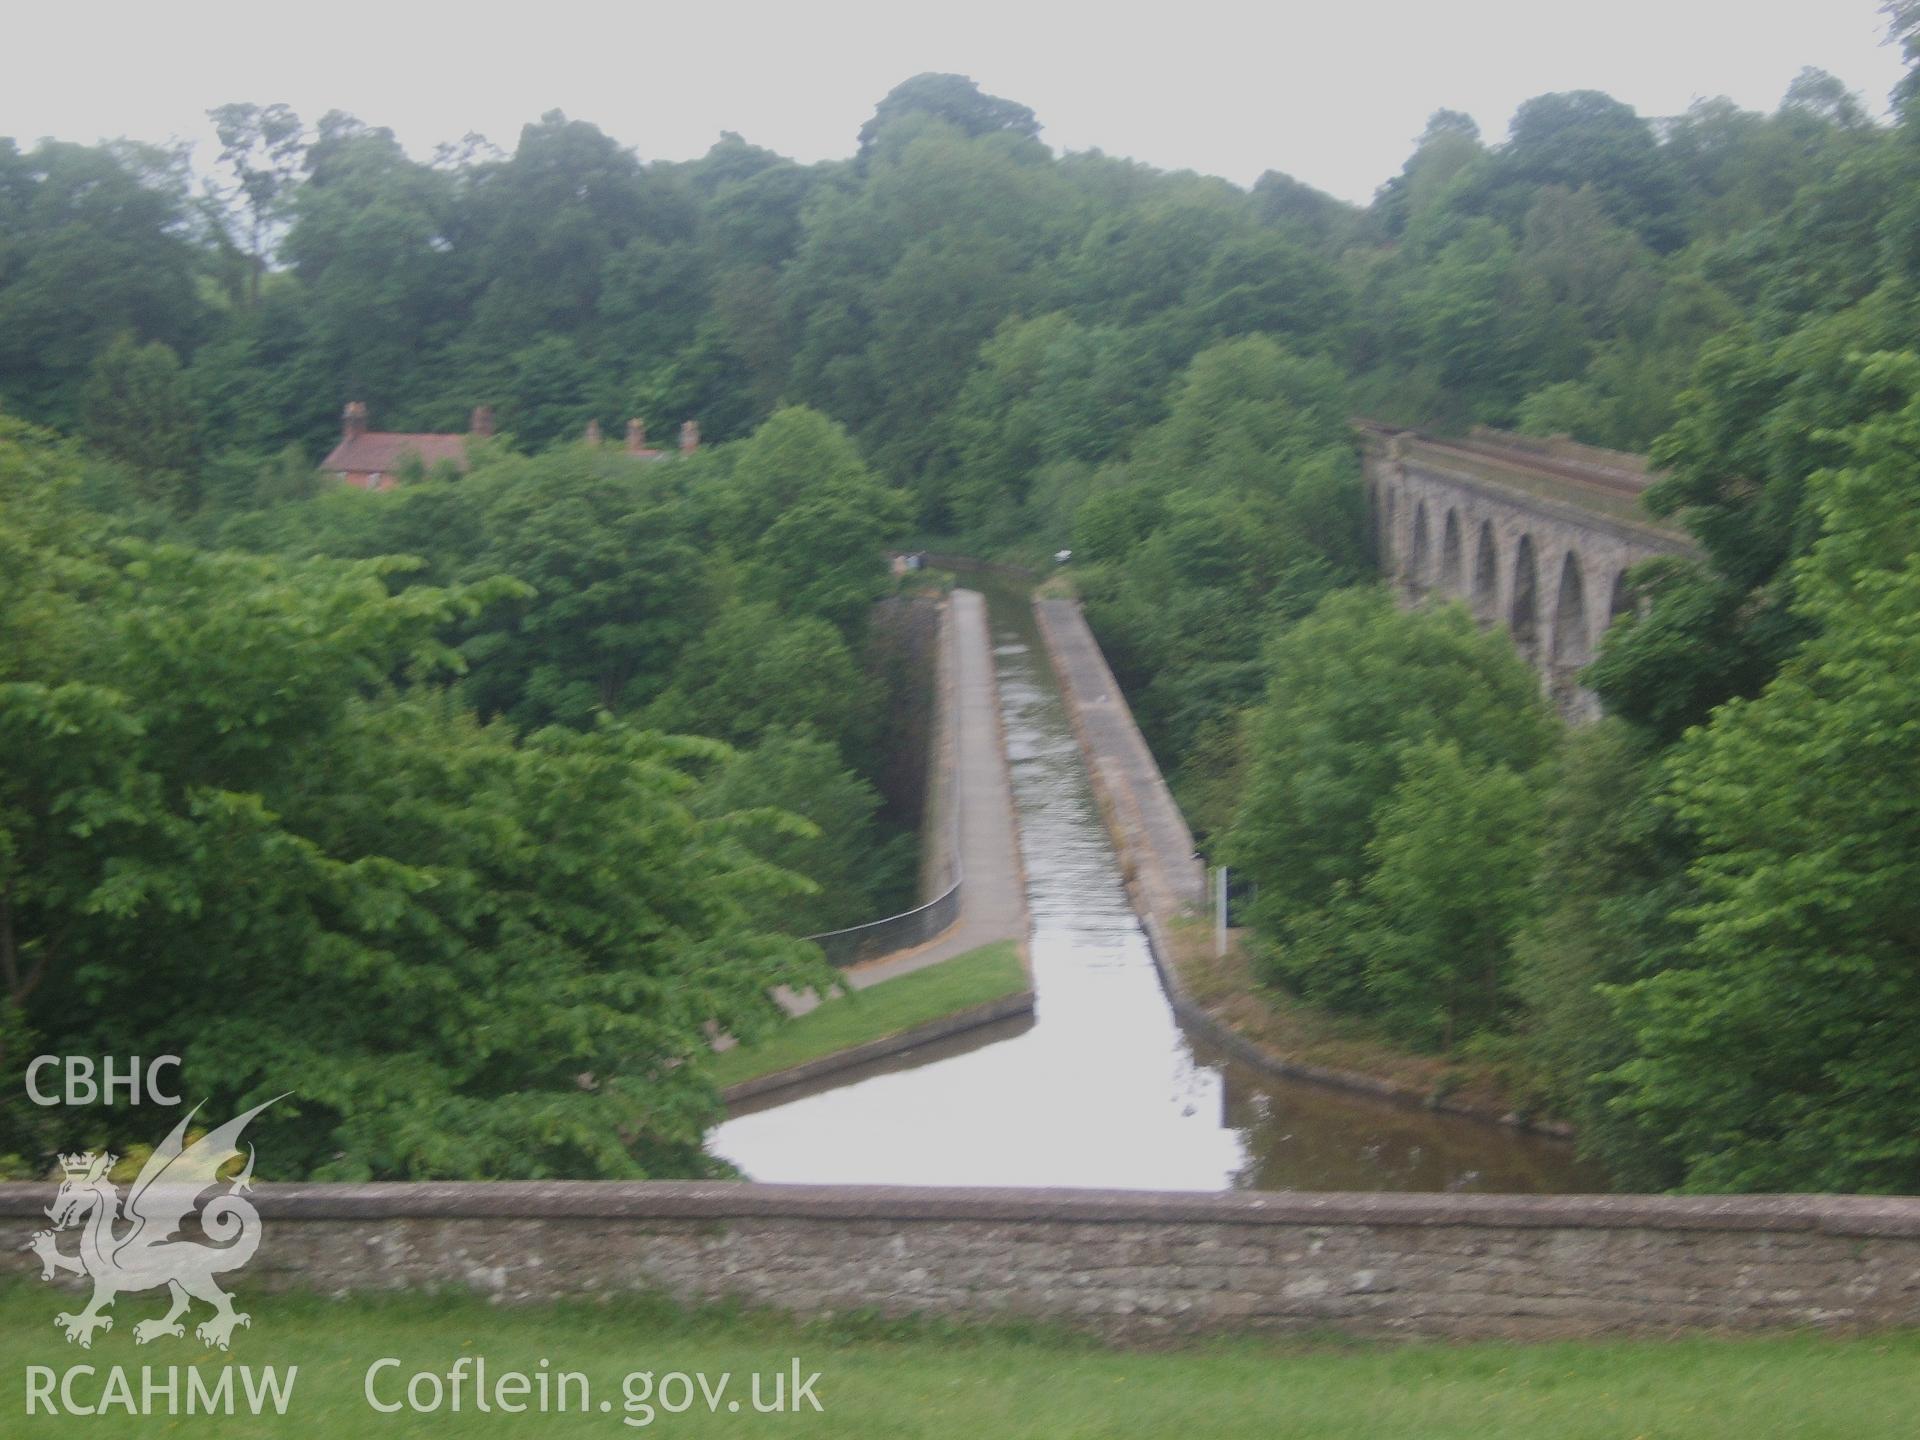 Chirk Viaduct deck and railway viaduct viewed from above the canal tunnel portal to the north.